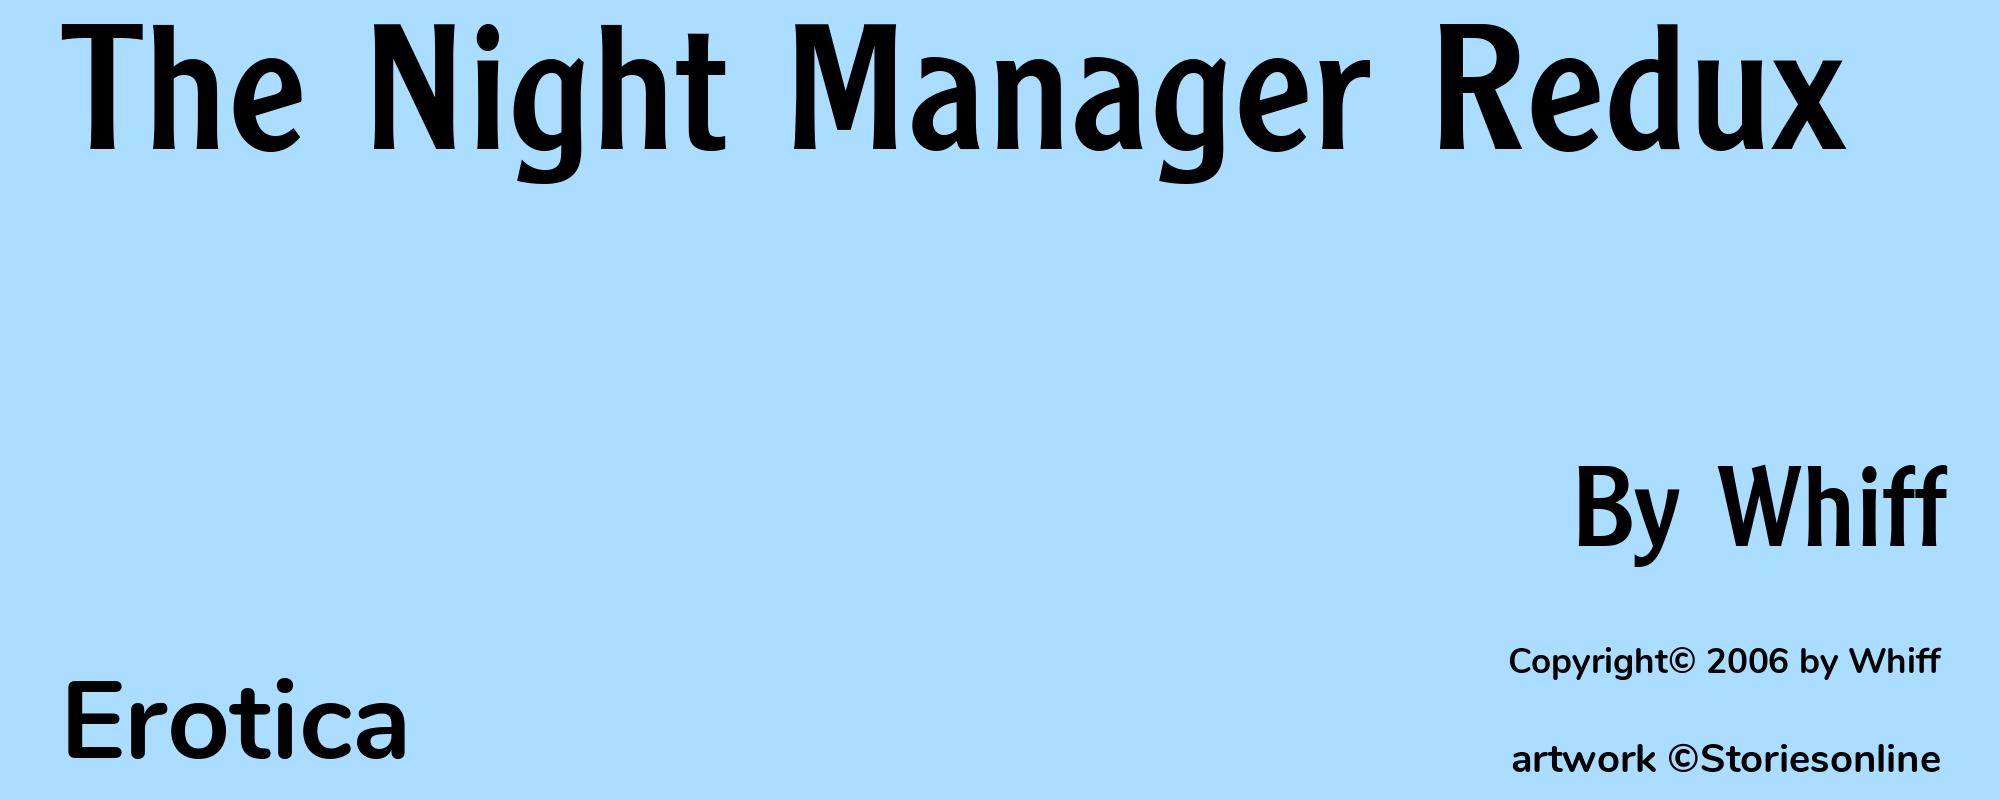 The Night Manager Redux - Cover